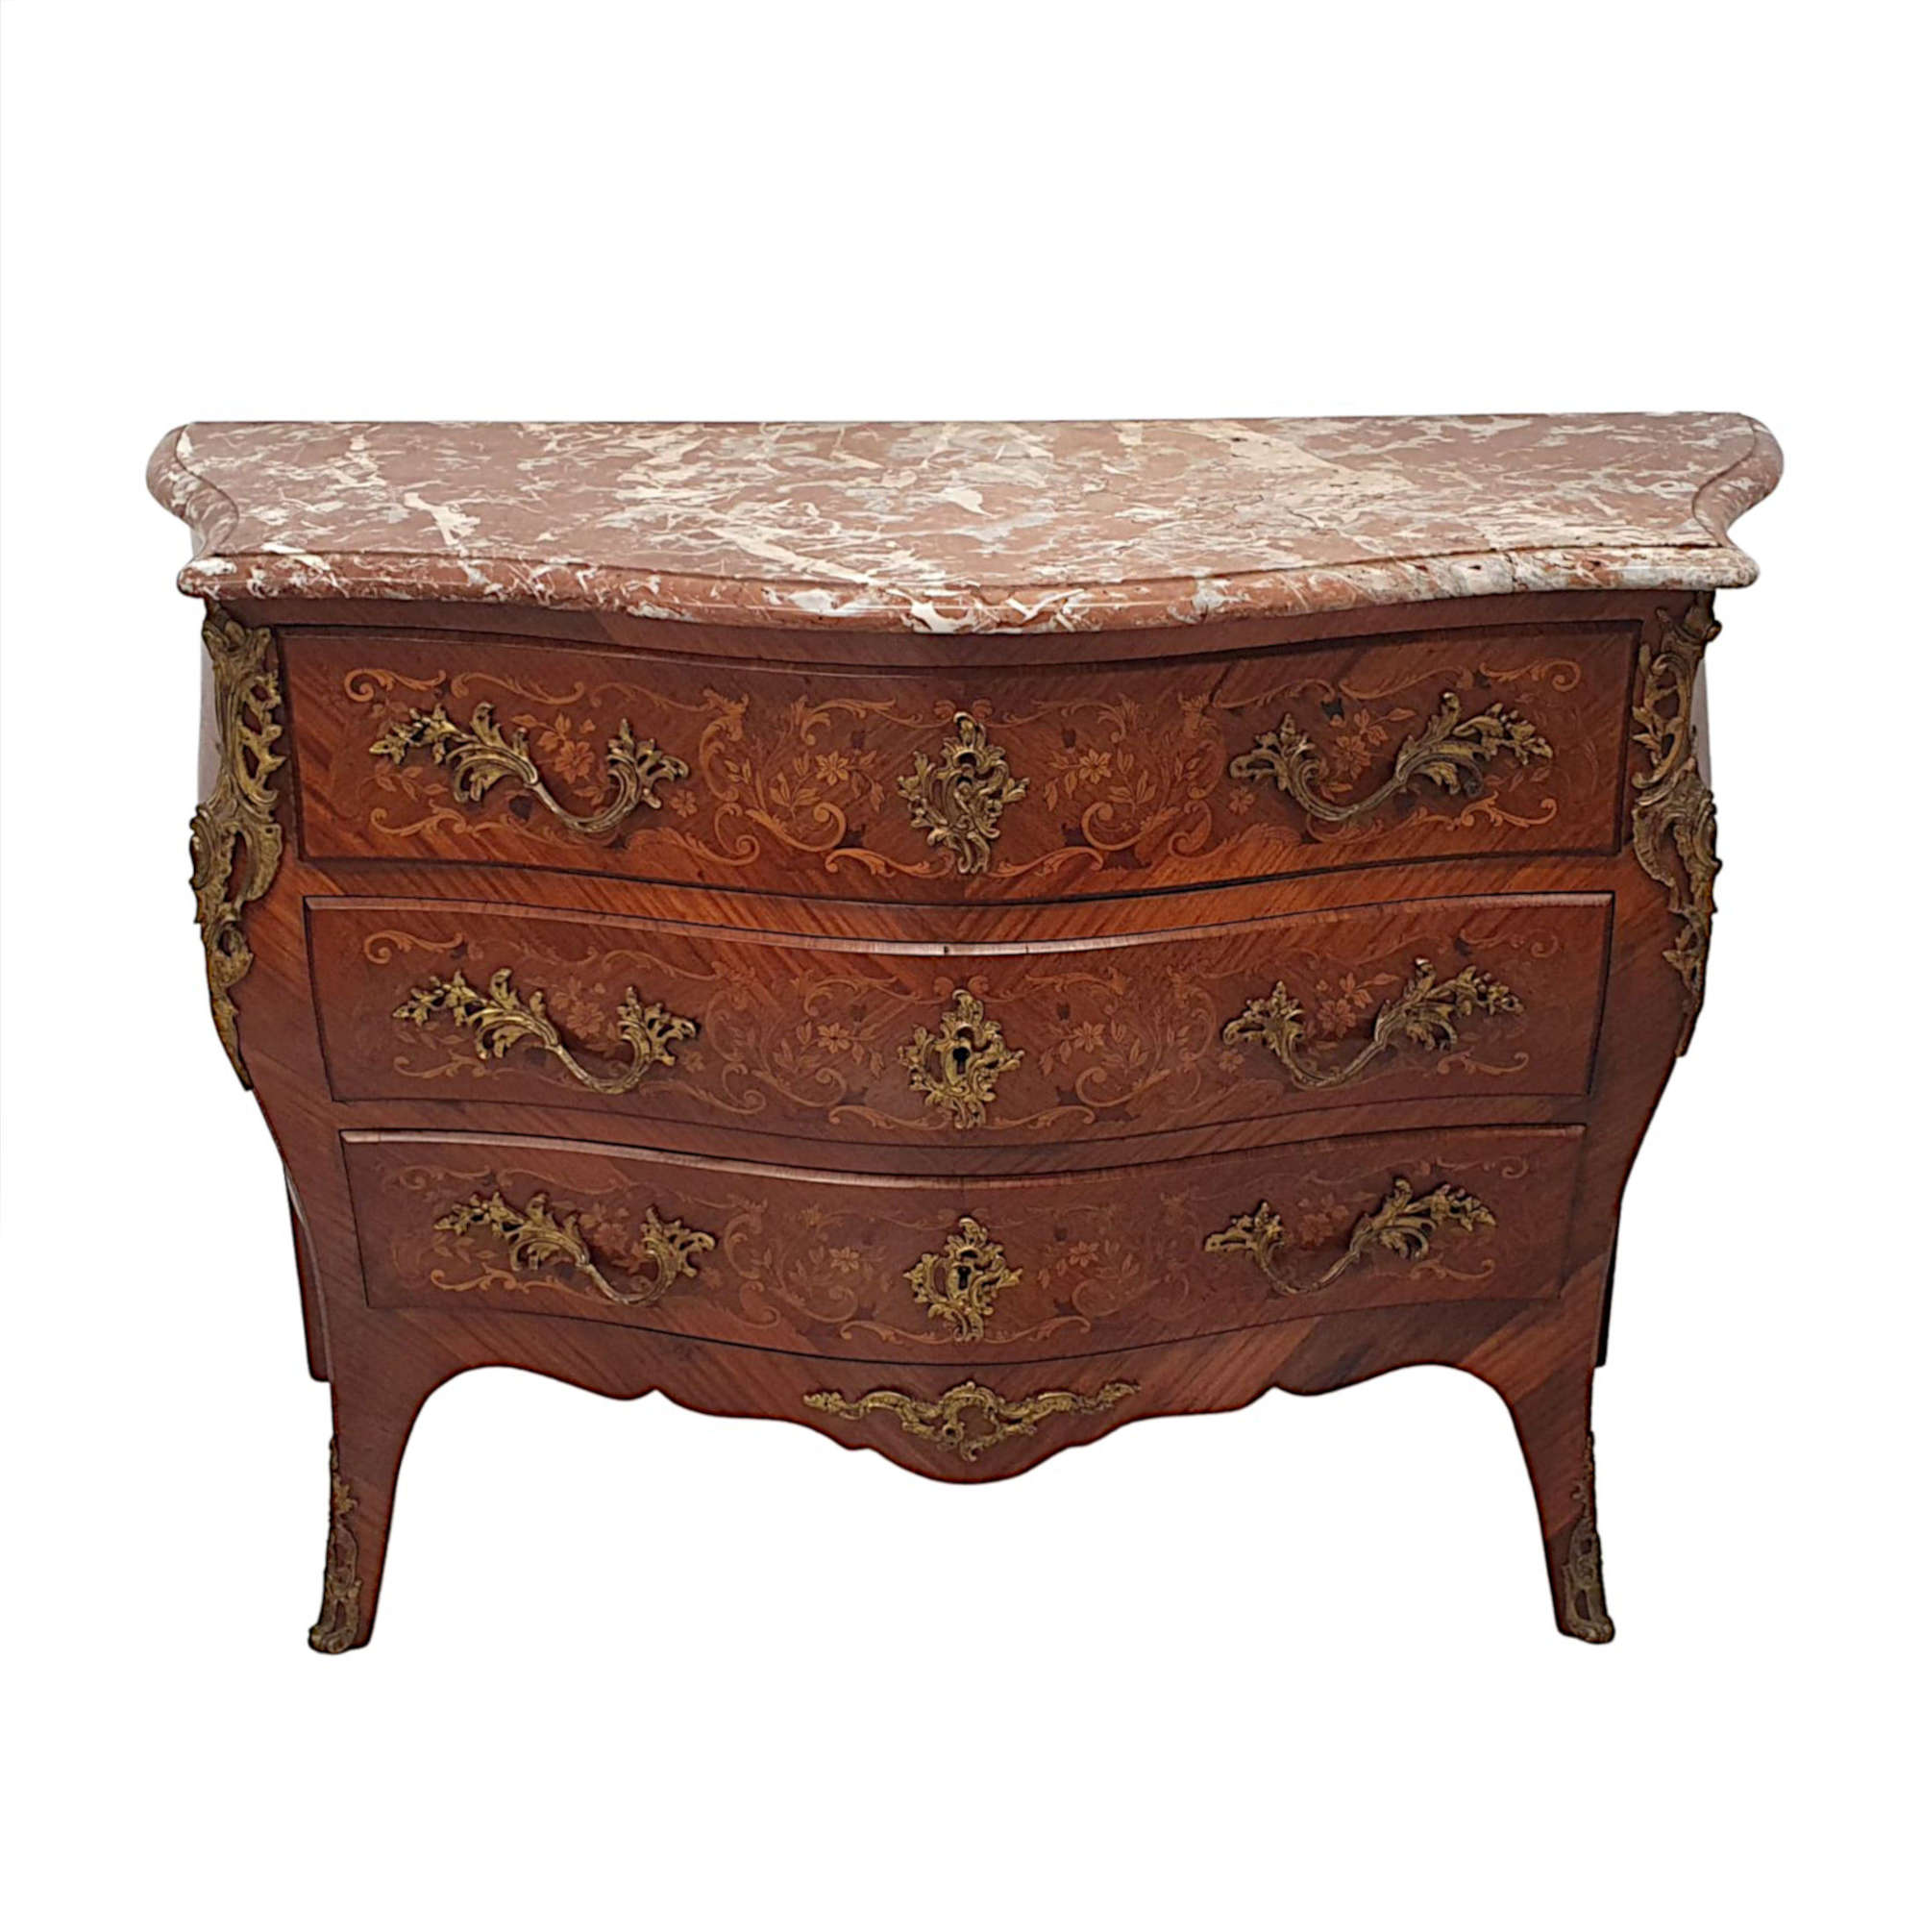 A Very Fine 19th Century Marquetry Inlaid Marble Top Antique Chest Of Drawers